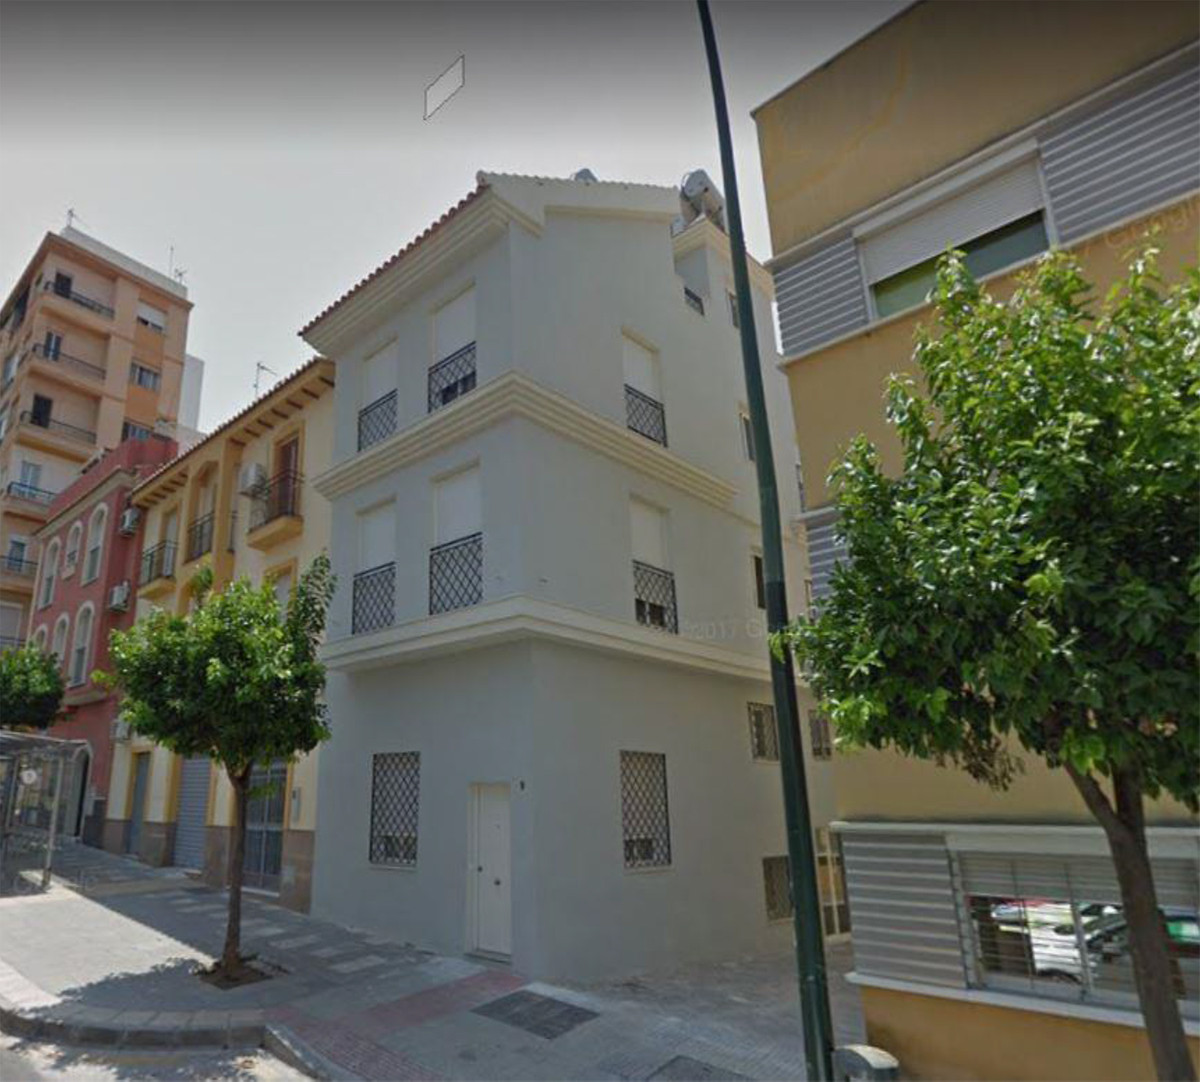 Building with 6 furnished studios located in the center of Malaga.

The area where the building is l, Spain